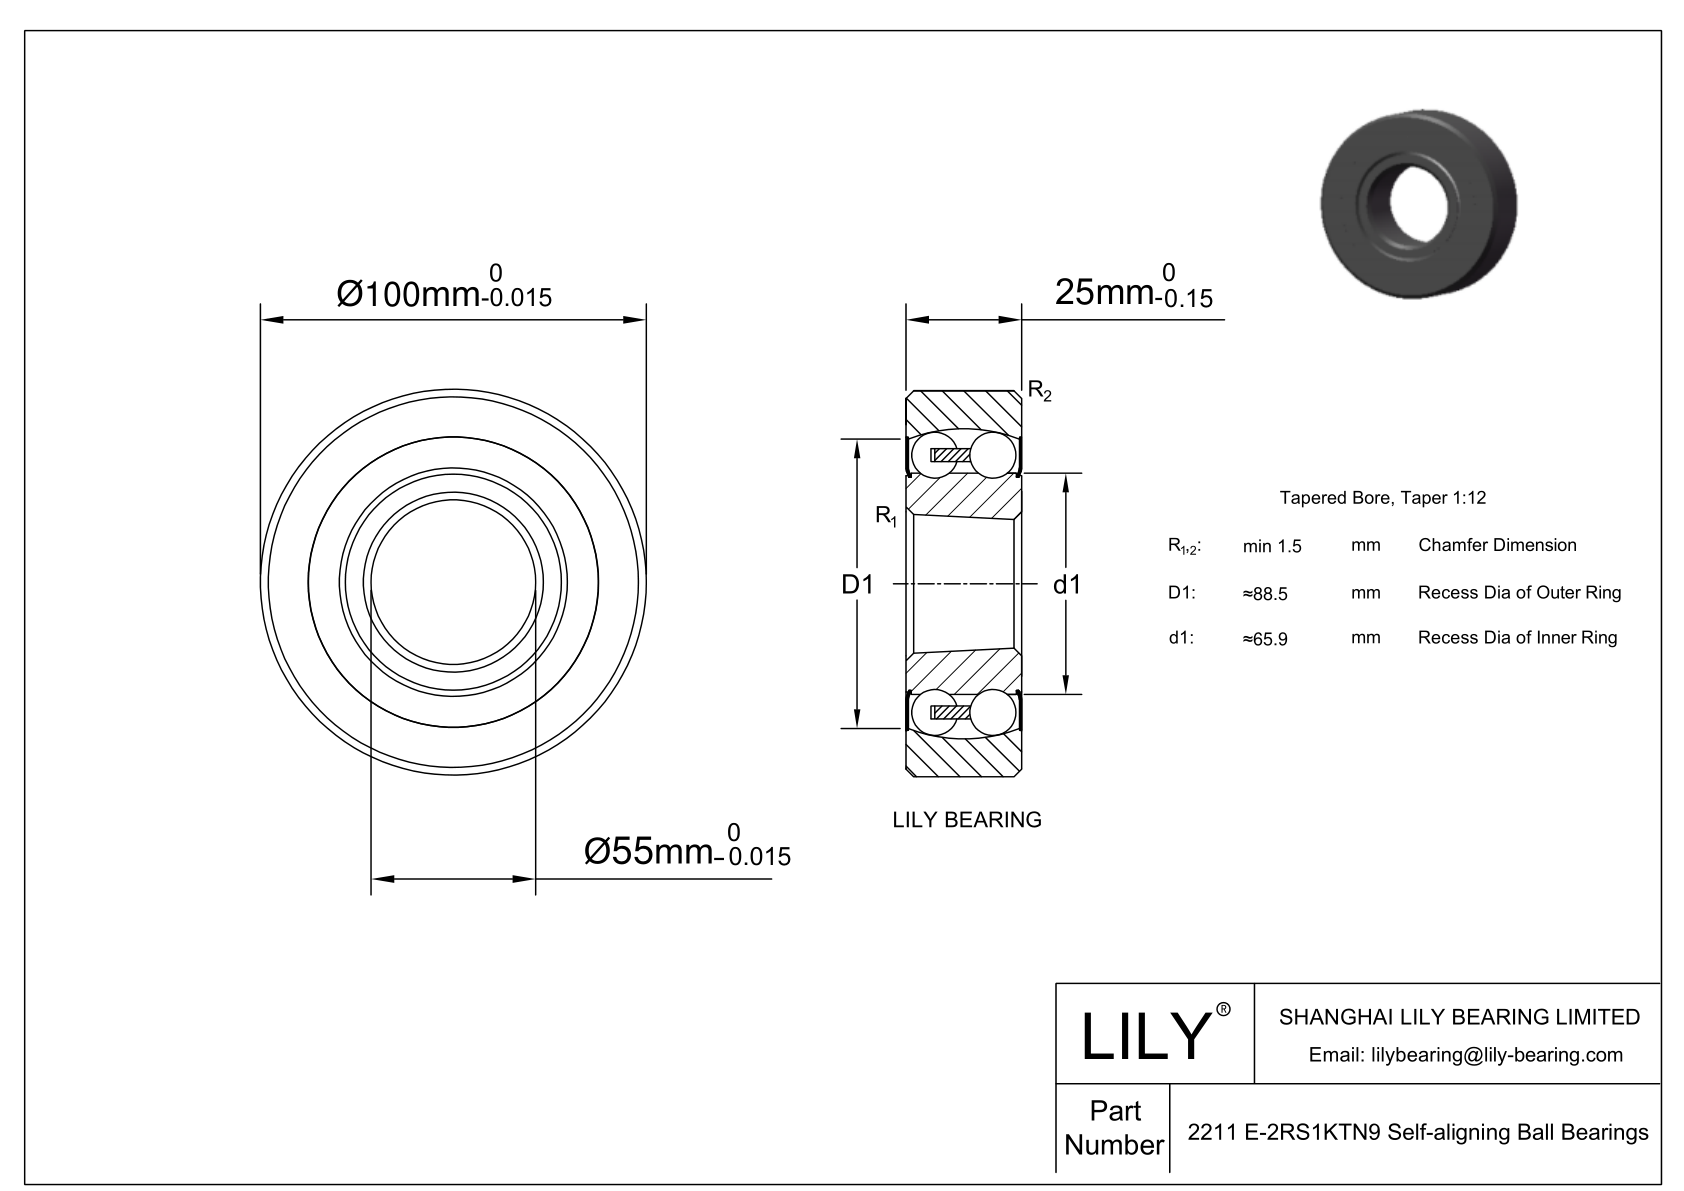 S2211 E-2RS1KTN9 Stainless Steel Self Aligning Ball Bearings cad drawing